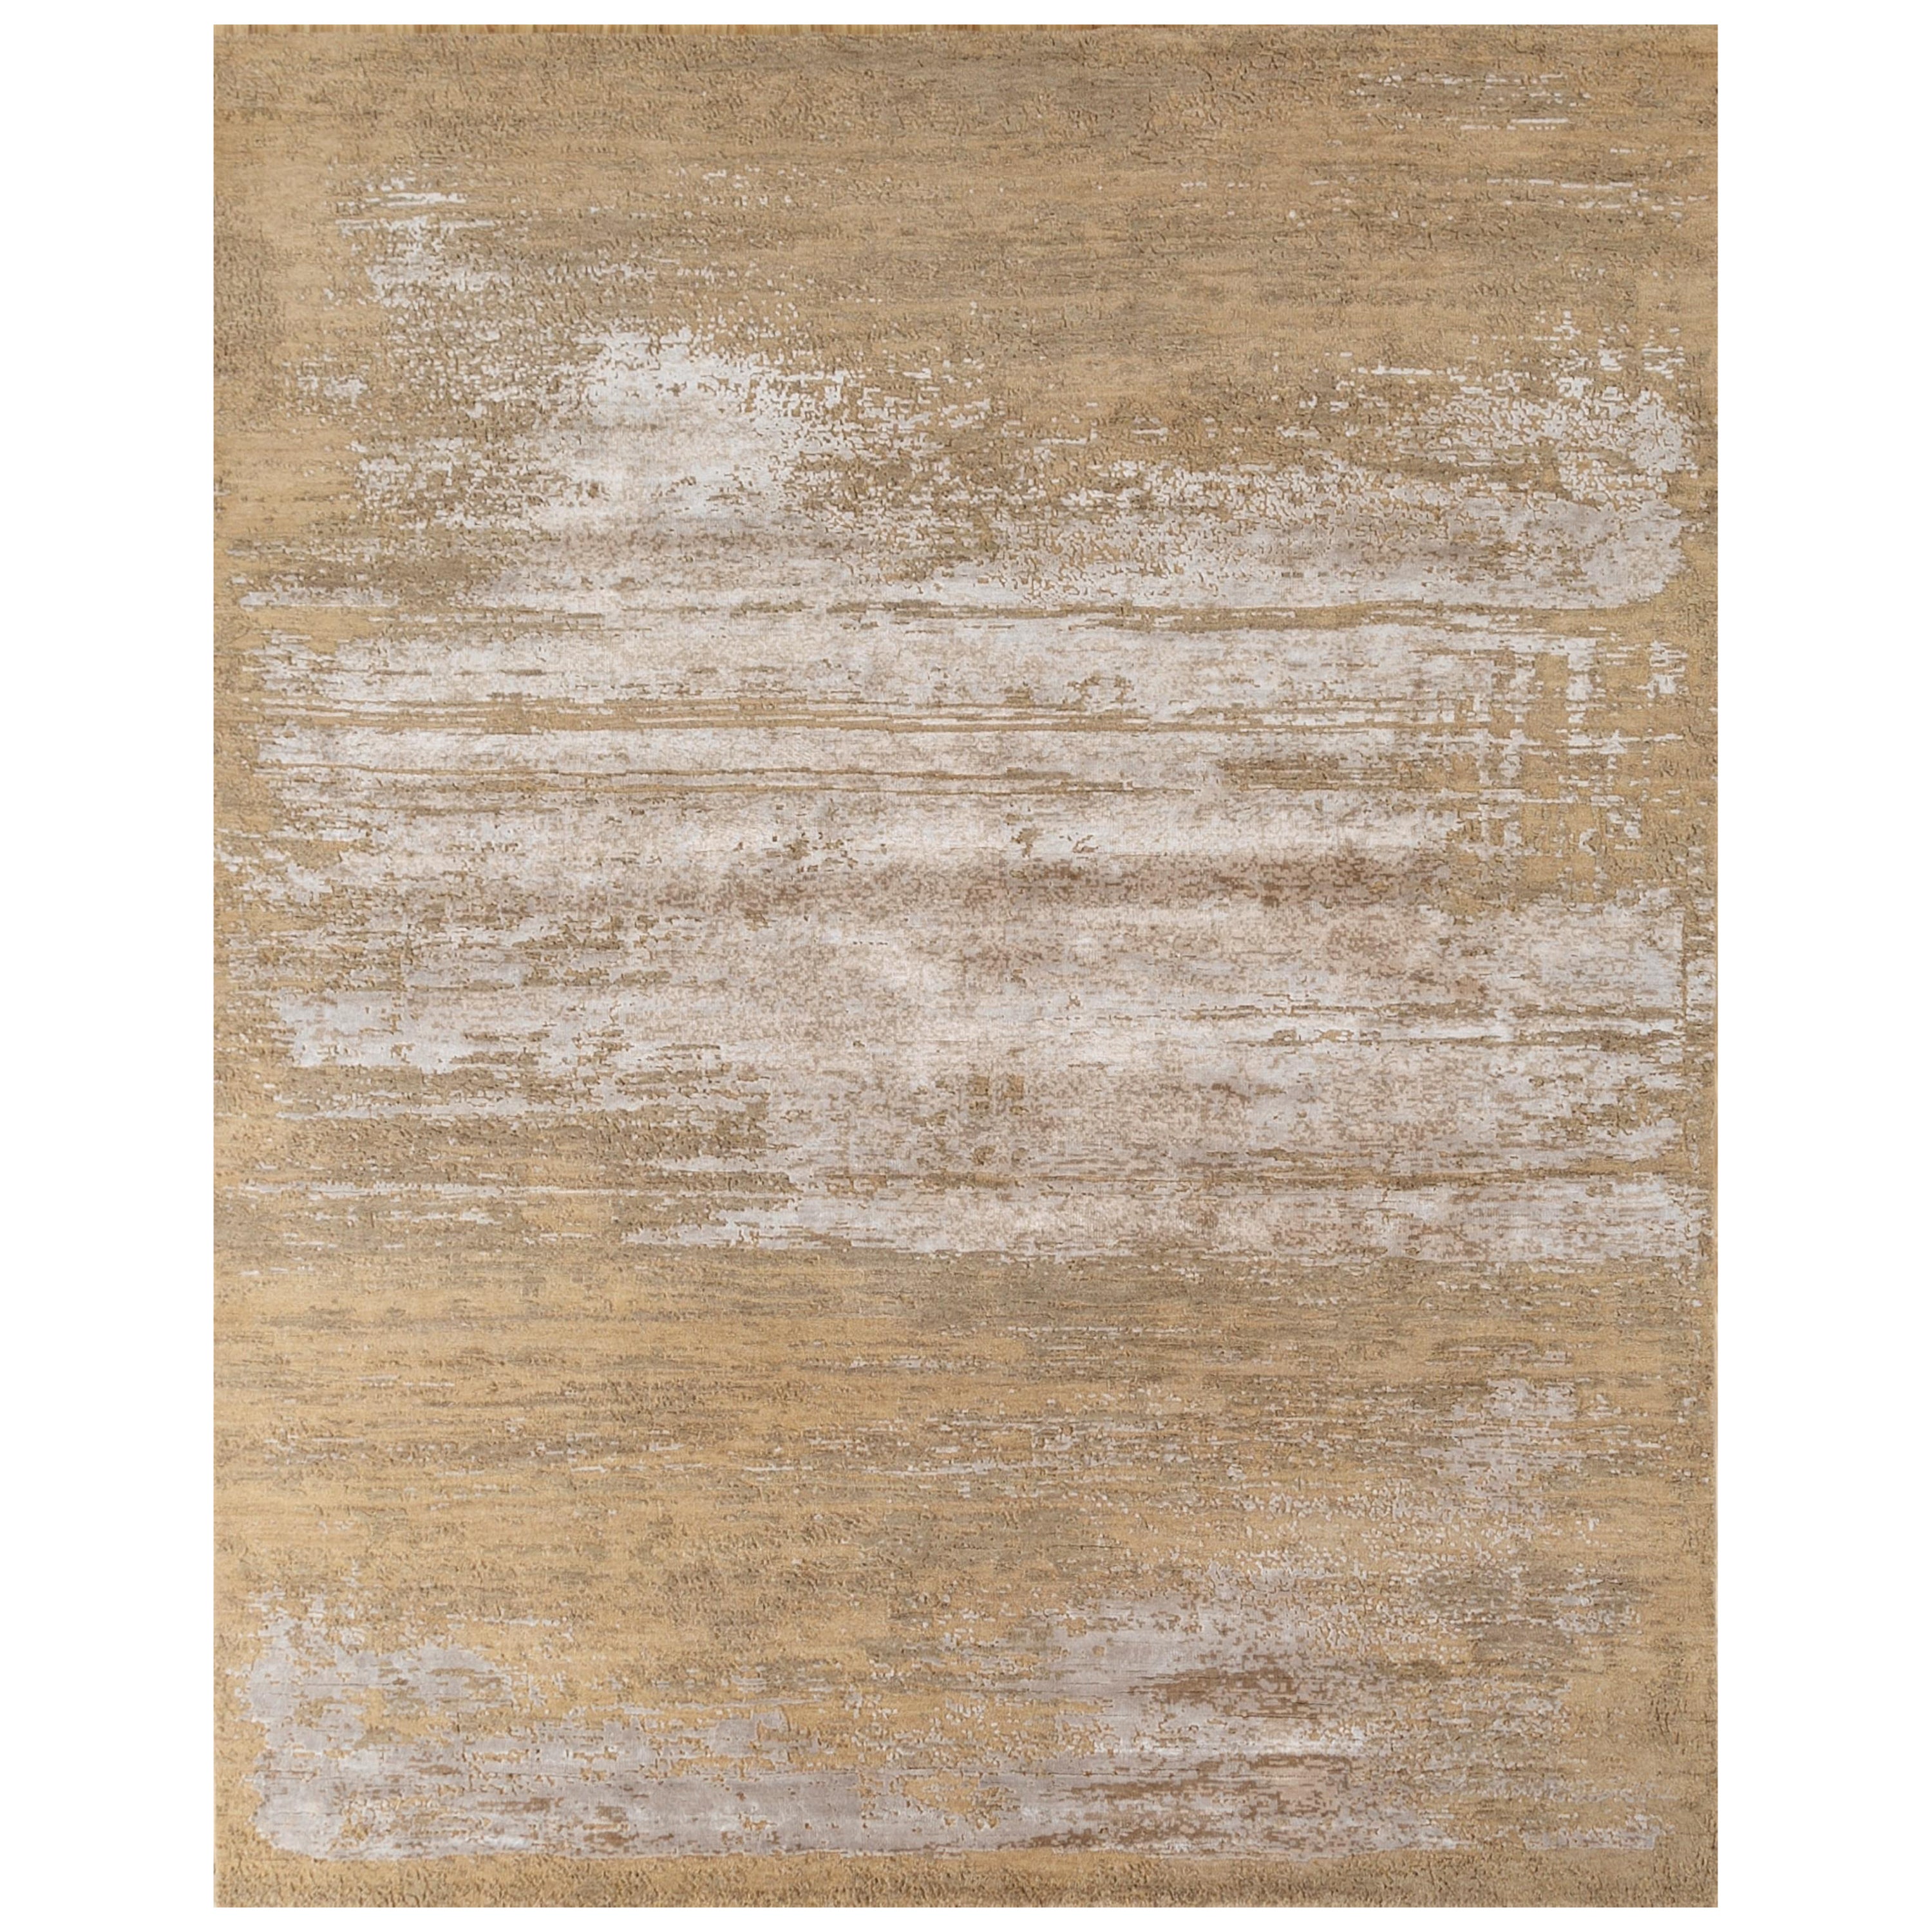 Zen Haven Light Peach & Clay 180X270 Cm Handknotted Rug For Sale